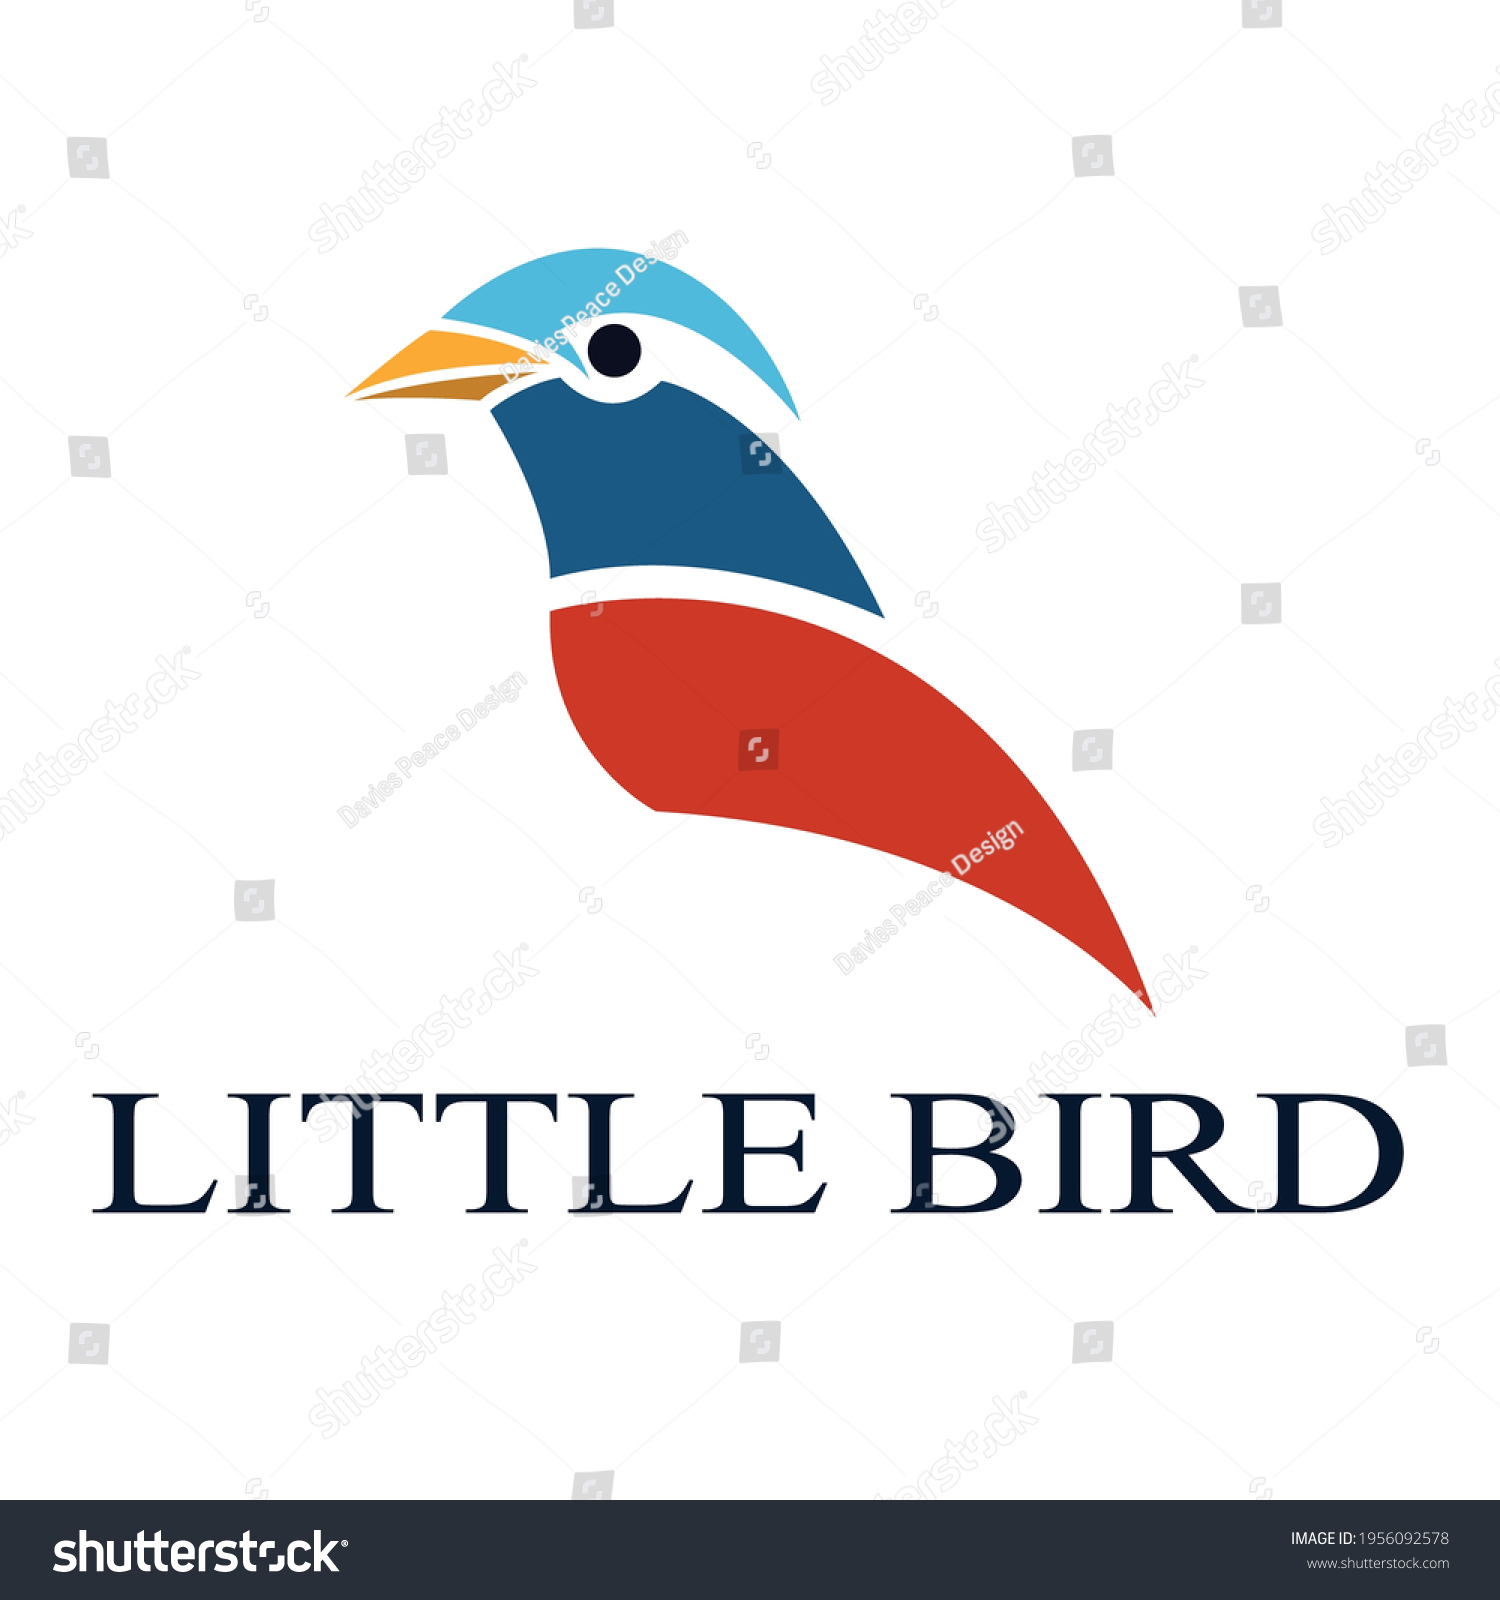 SVG of The abstract vector image of a little bird.It is suitable for making logos or decorations. svg